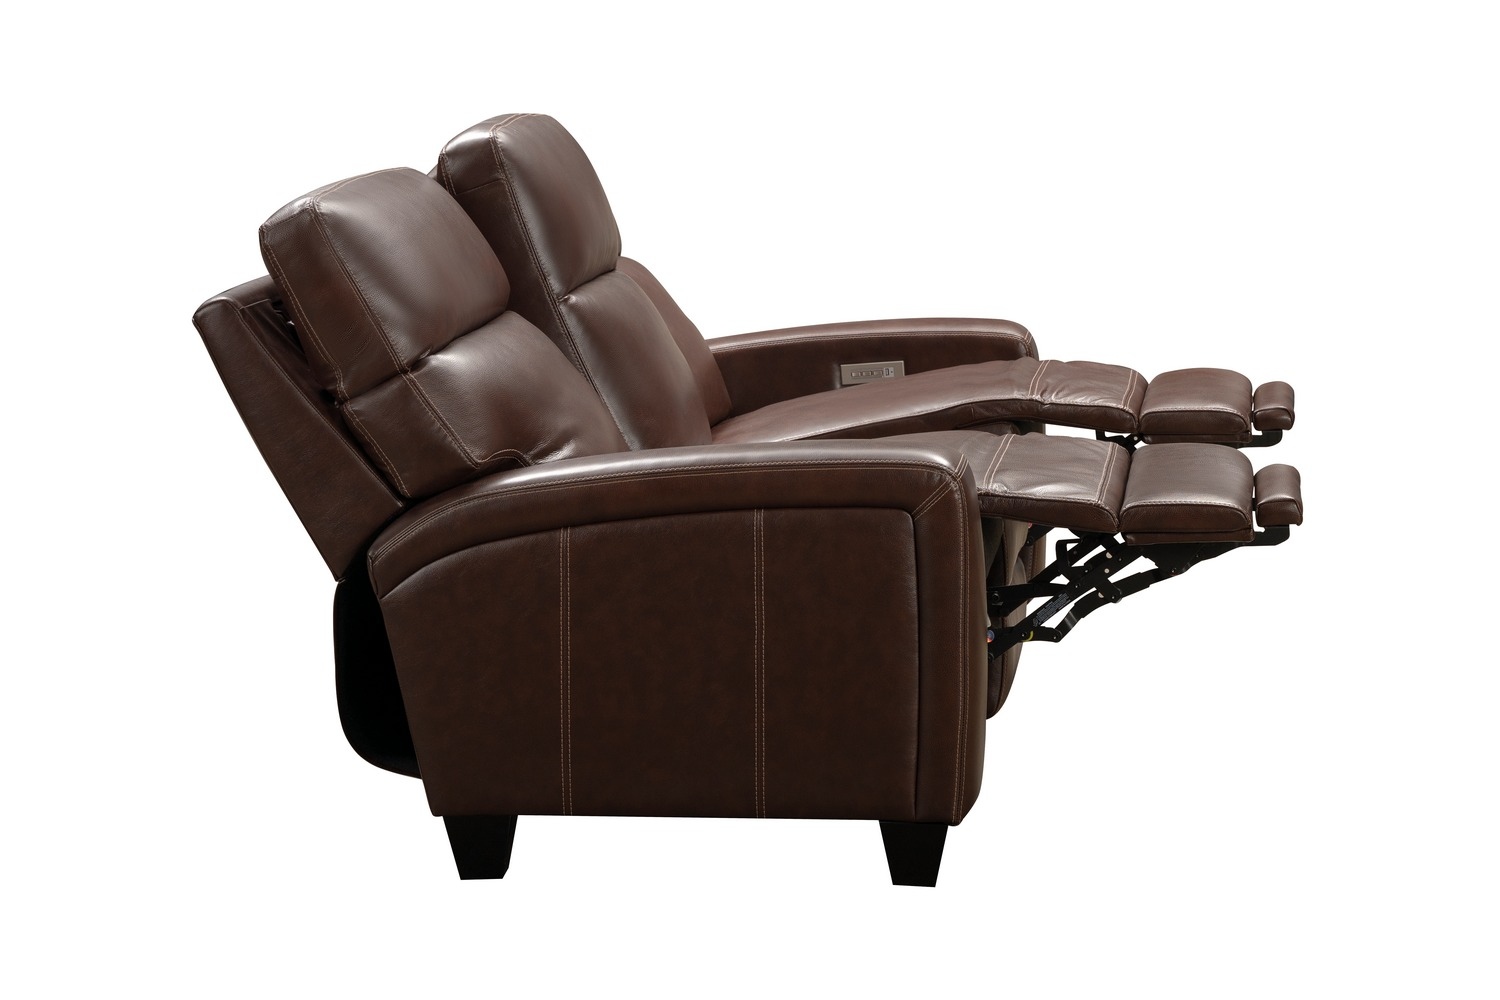 Barcalounger Marcello Power Reclining Sofa with Power Head Rests and Power Lumbar - Castleton Rustic Brown/Leather Match